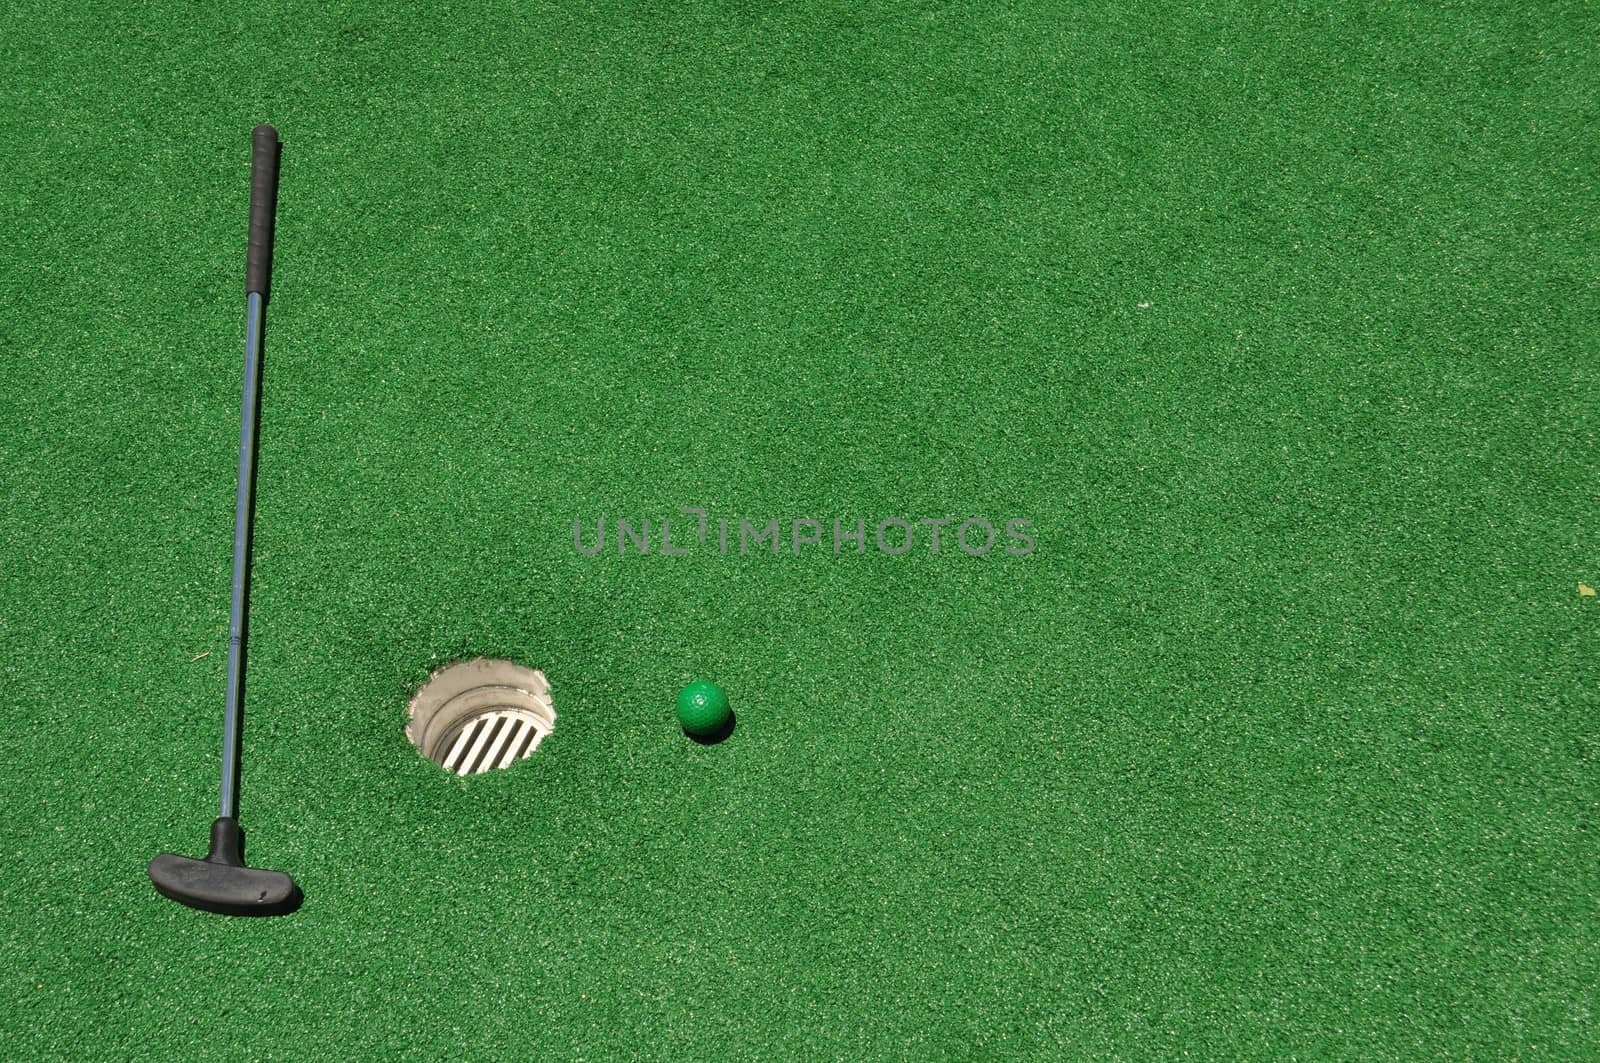 Mini Golf Background 2 by RefocusPhoto